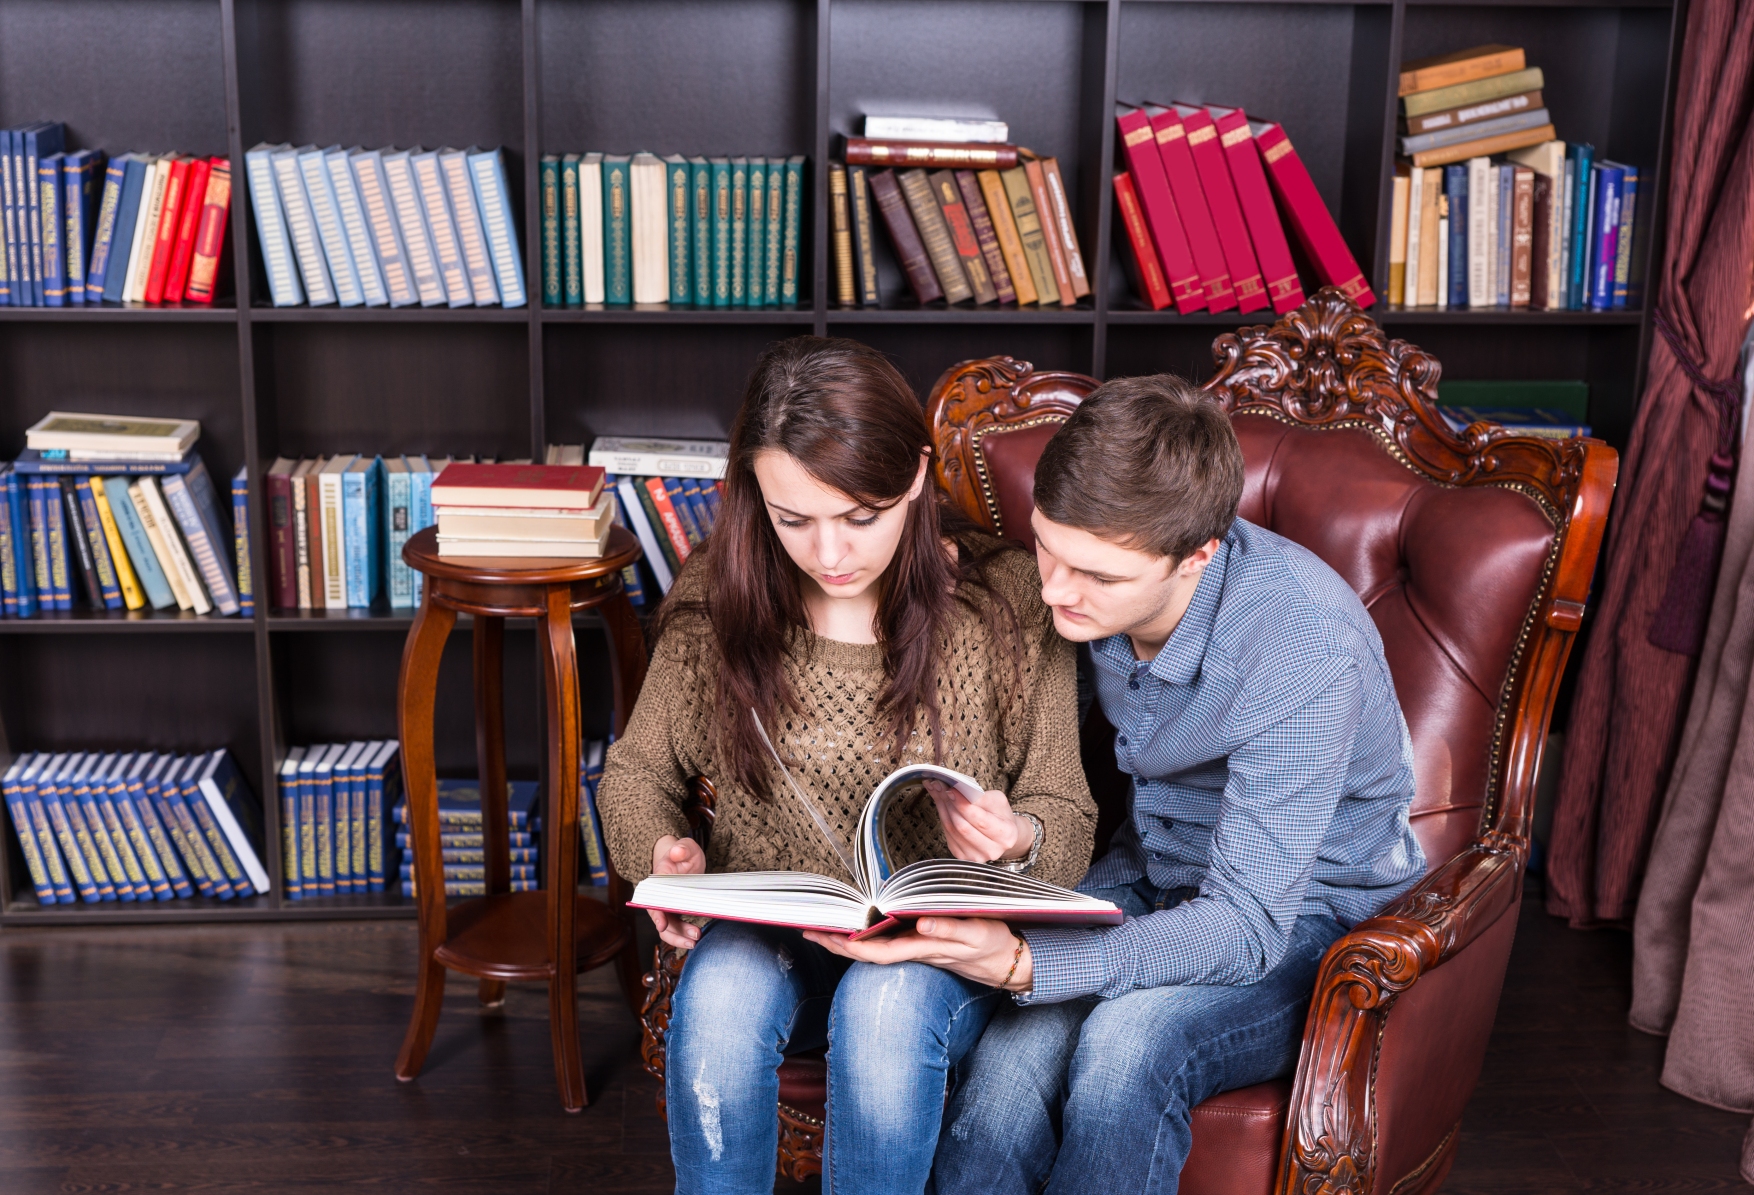 kozzi-Serious_Young_Couple_on_a_Chair_Reading_a_Book-1755x1195-1.jpg